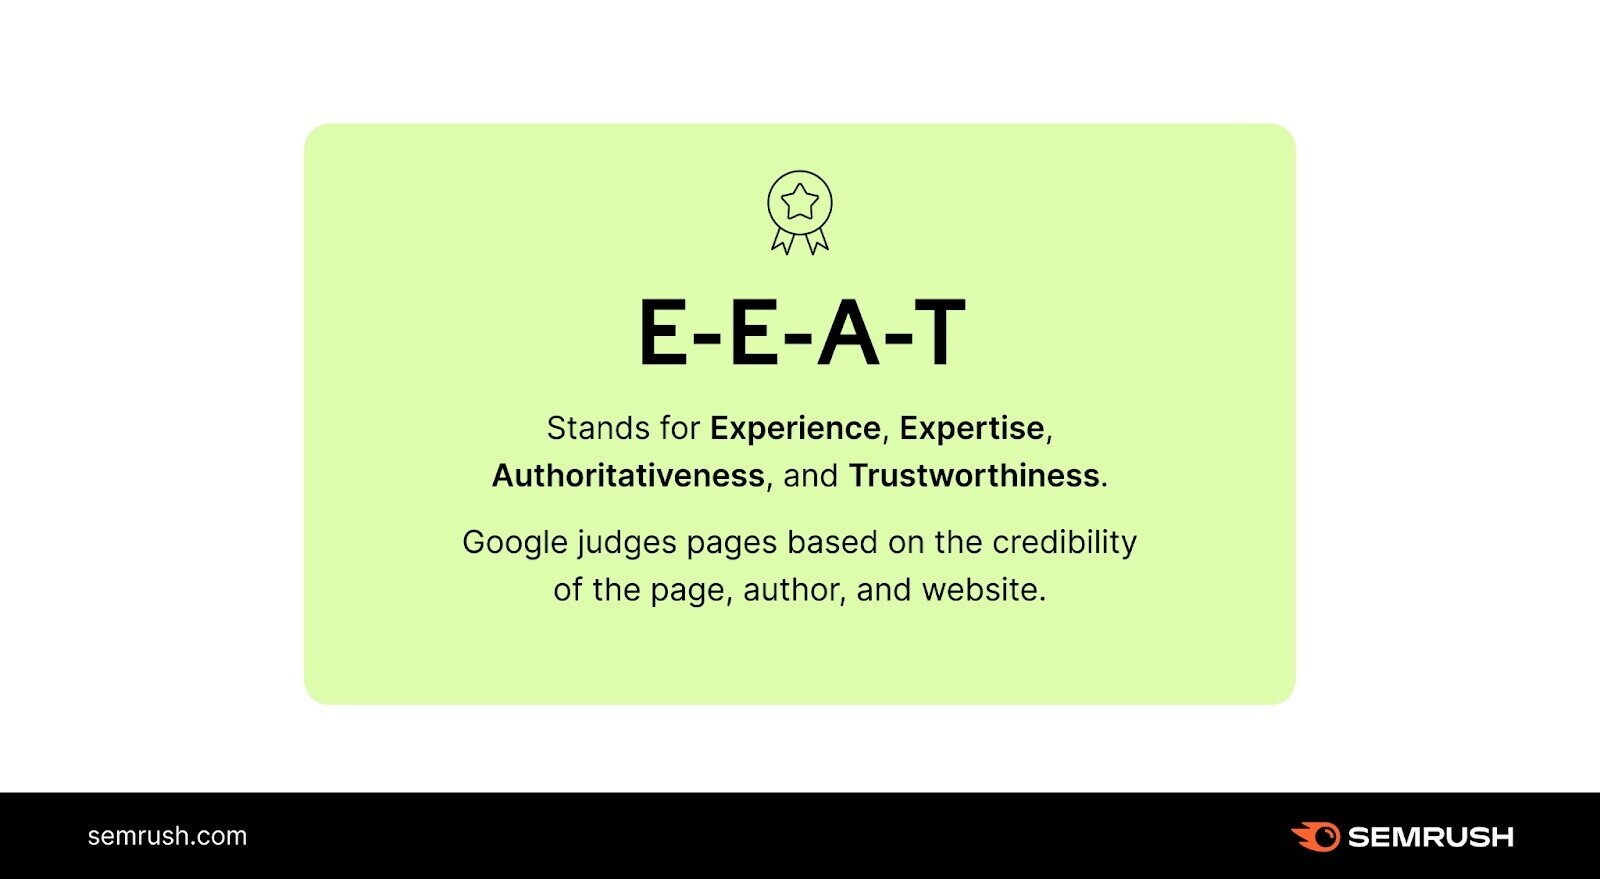 infographic explaining what E-E-A-T stands for